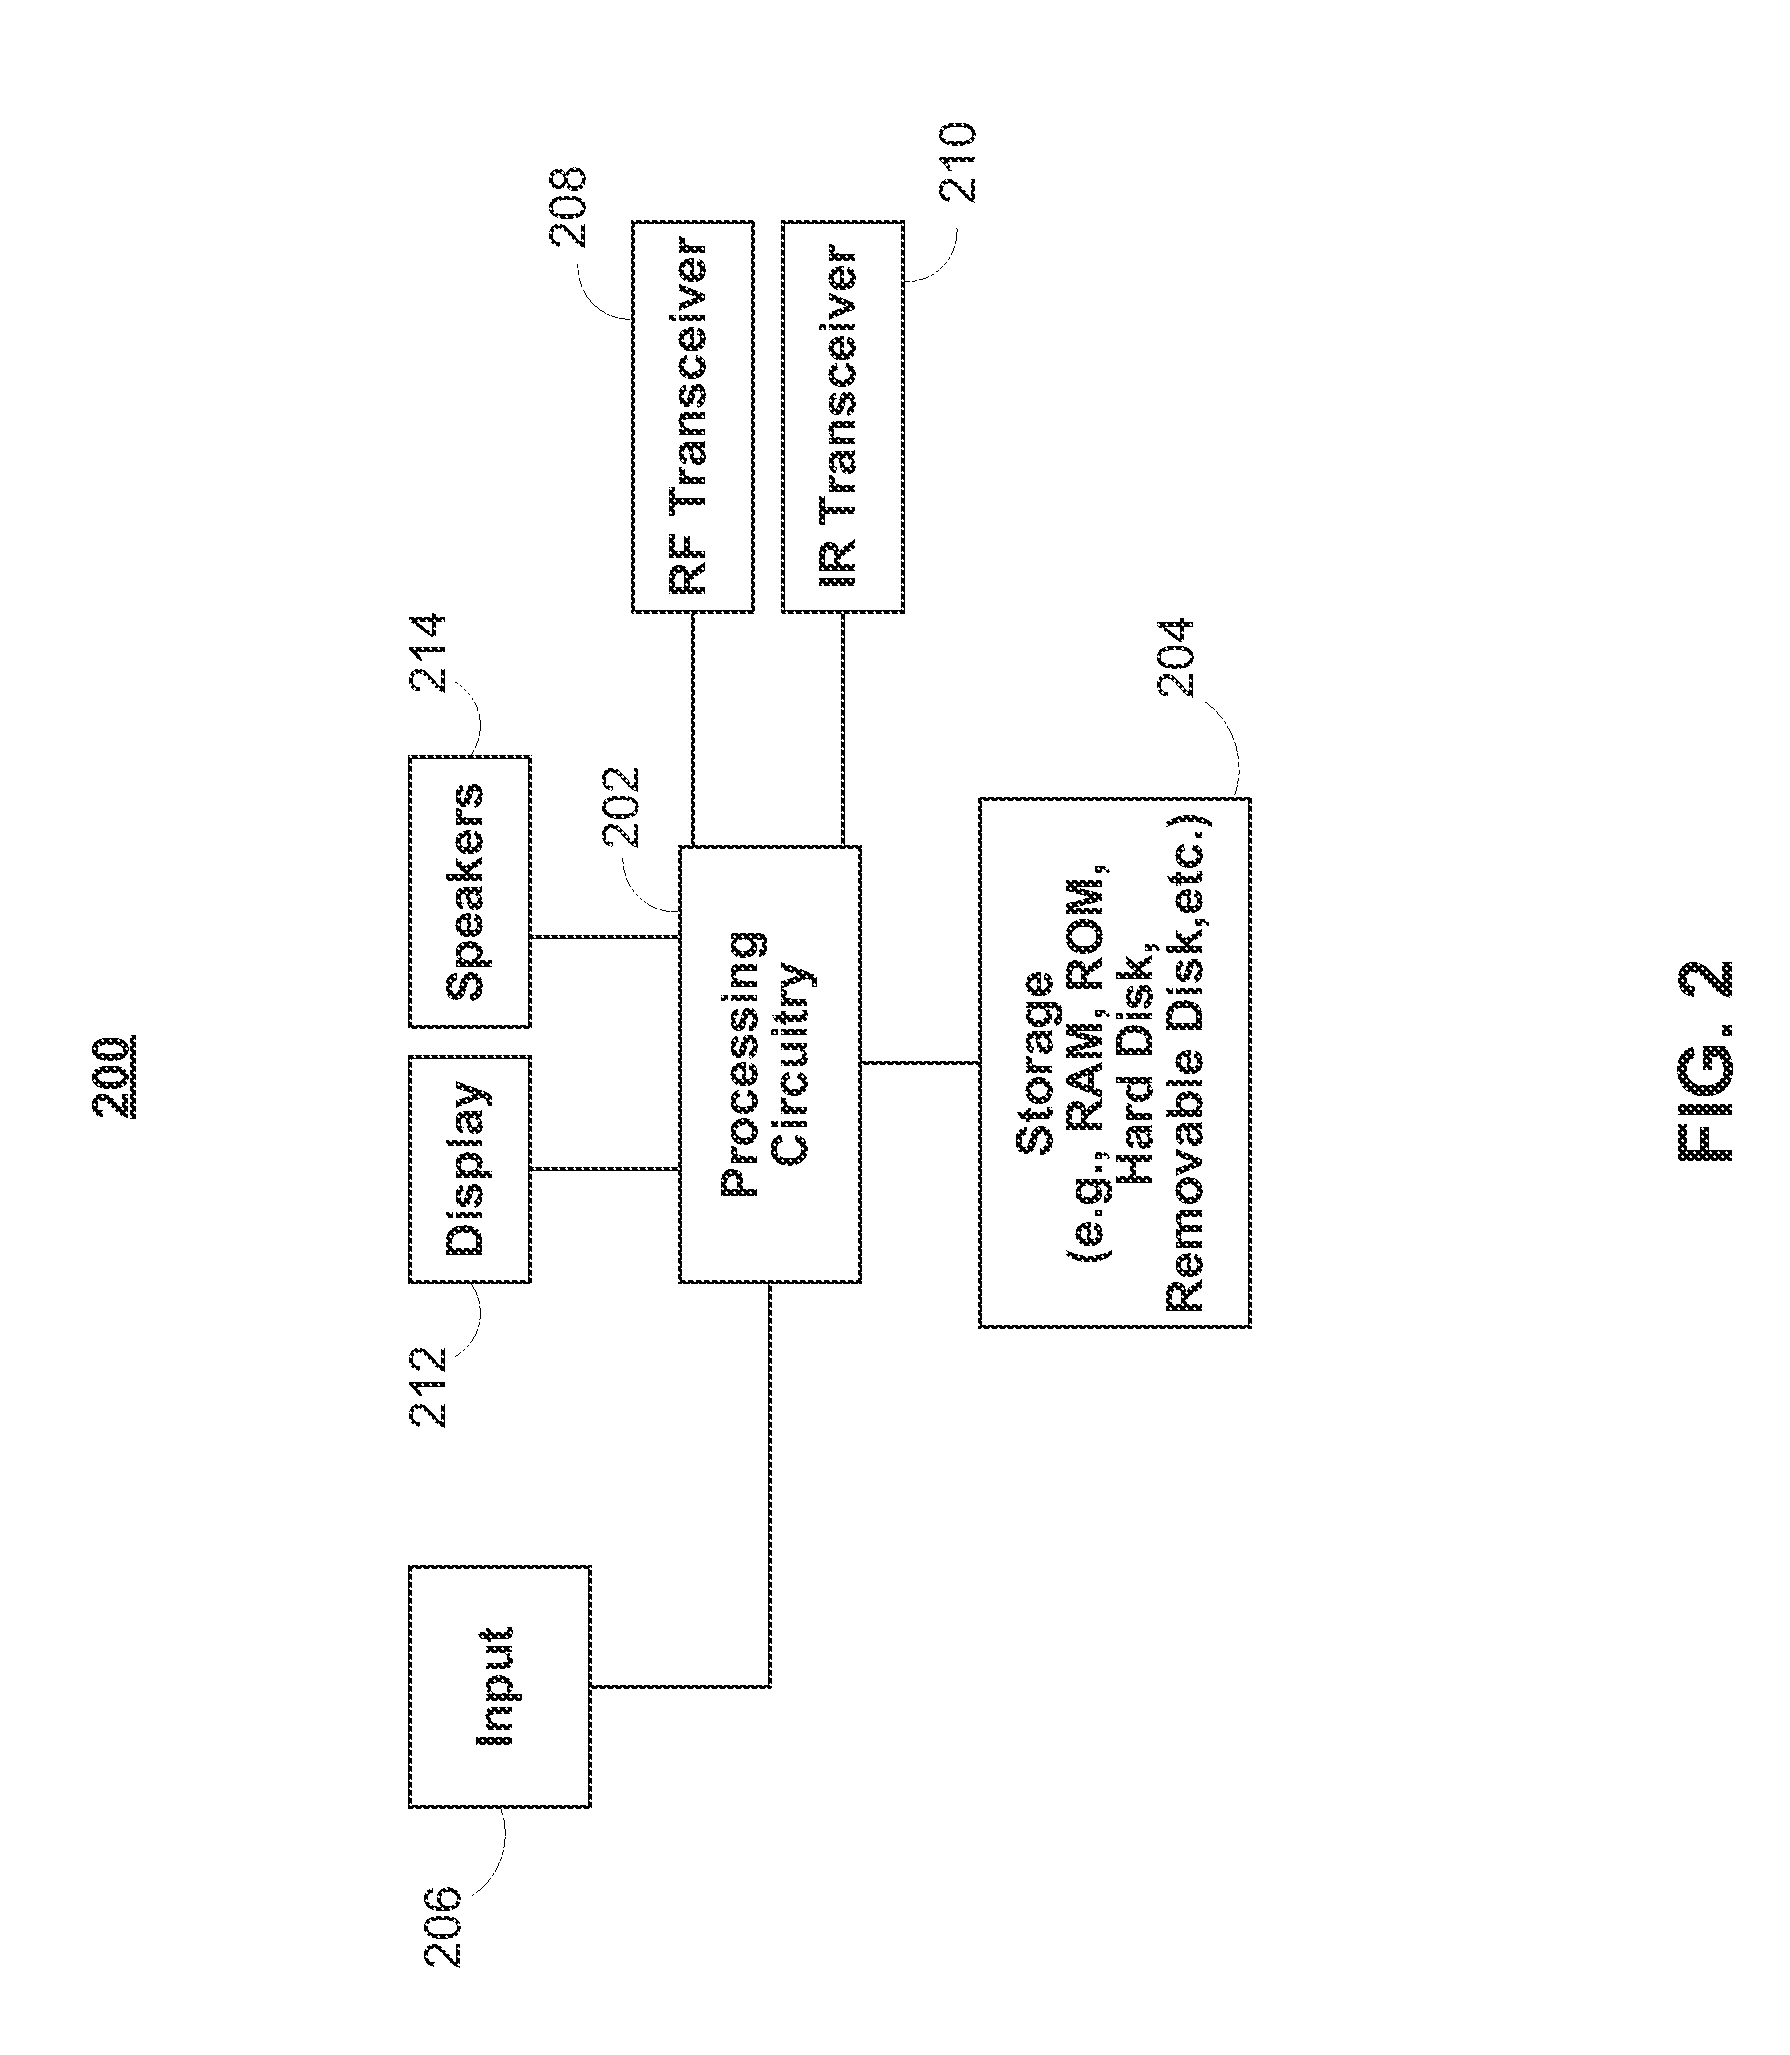 Systems and methods for controlling multiple user access to media devices in a connected platform environment